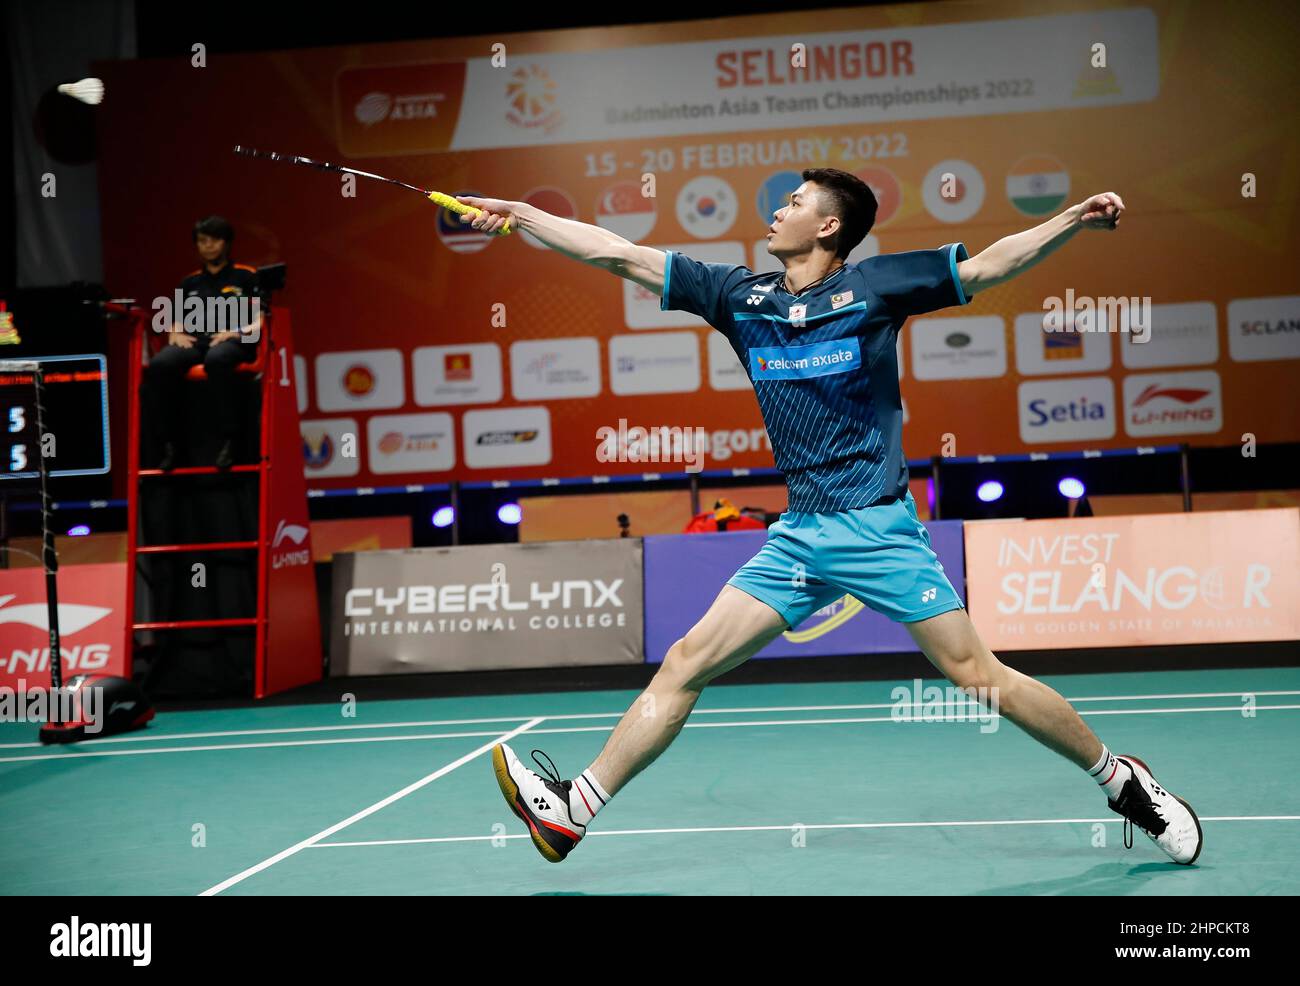 live streaming final badminton asia 2022